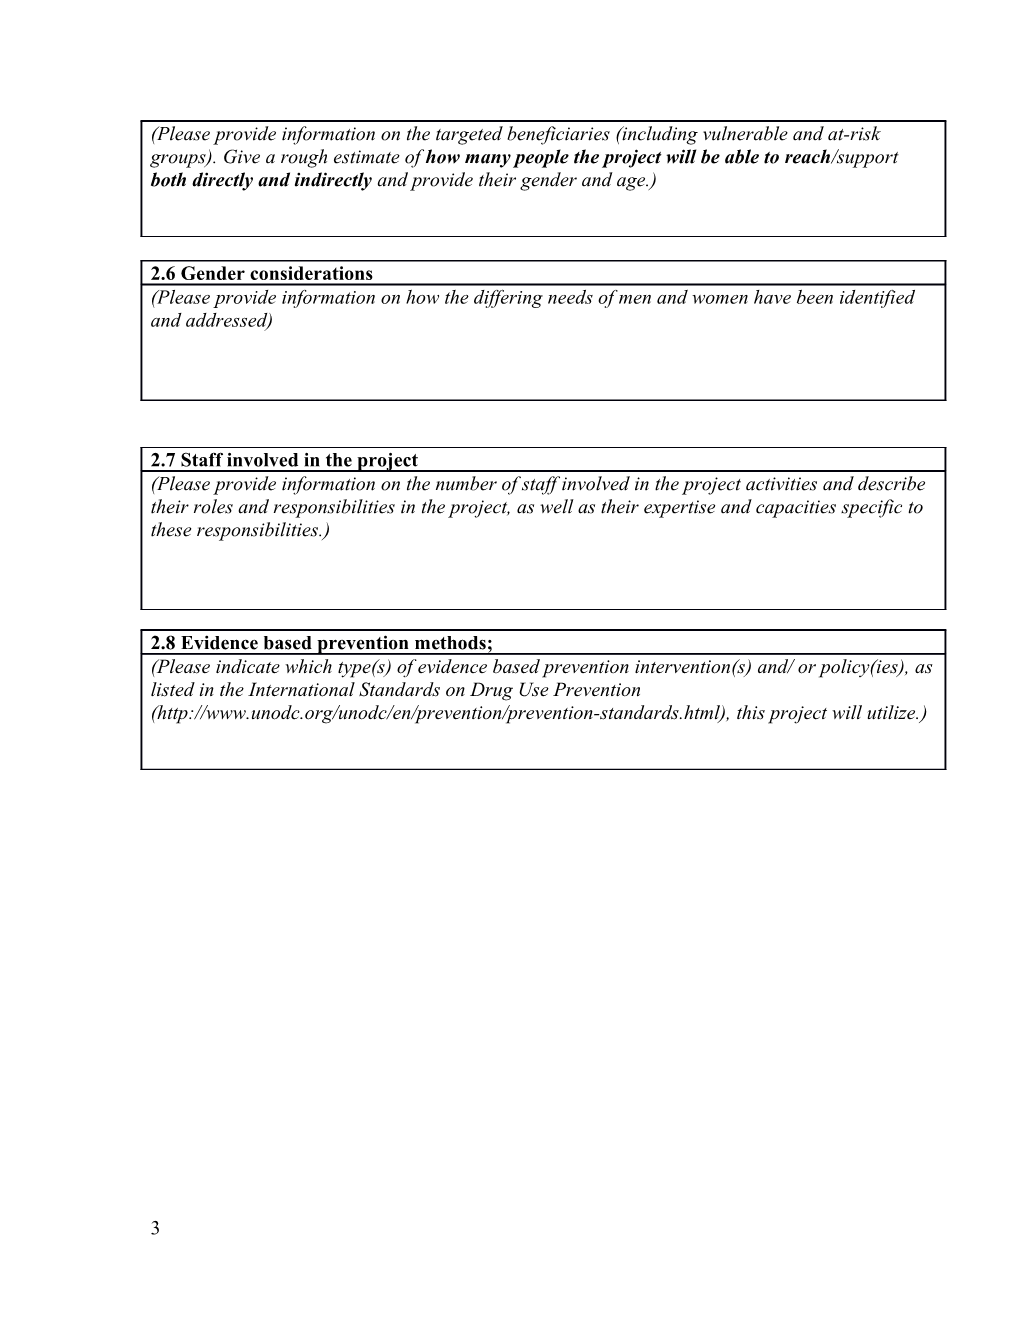 Please Make Sure Your Application Satisfies All the Criteria Specified in the Below Checklist